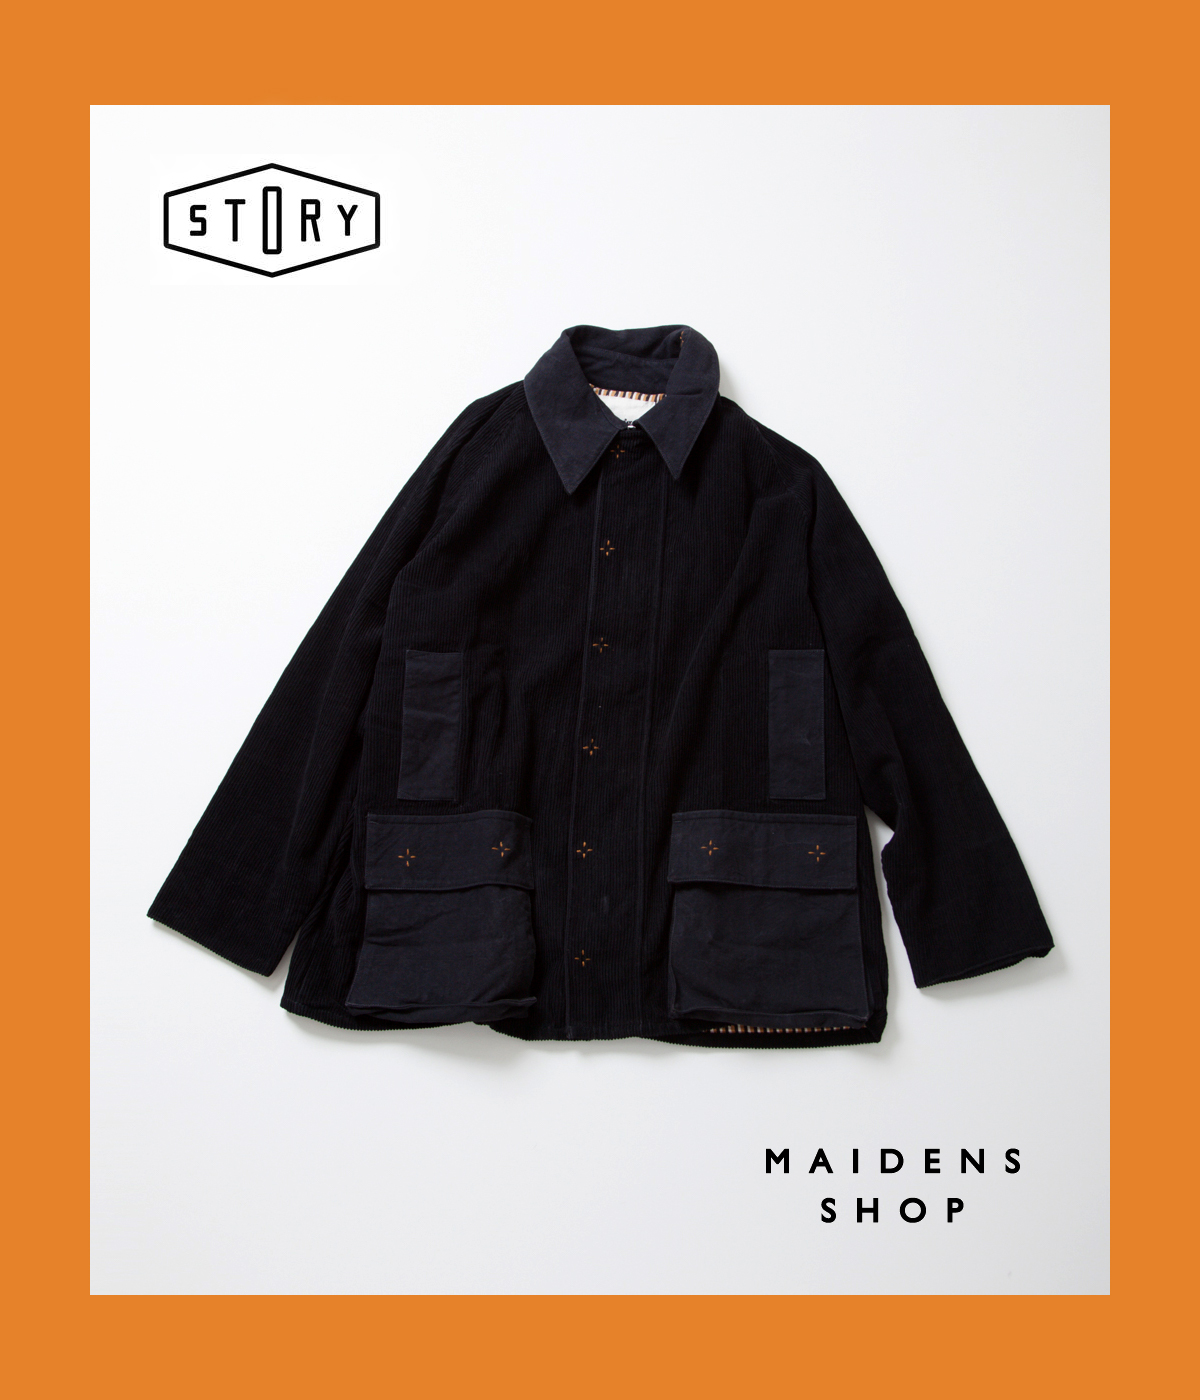 EXCLUSIVE COLLECTION 【STORY mfg. for MAIDENS SHOP ”IRON BLACK 